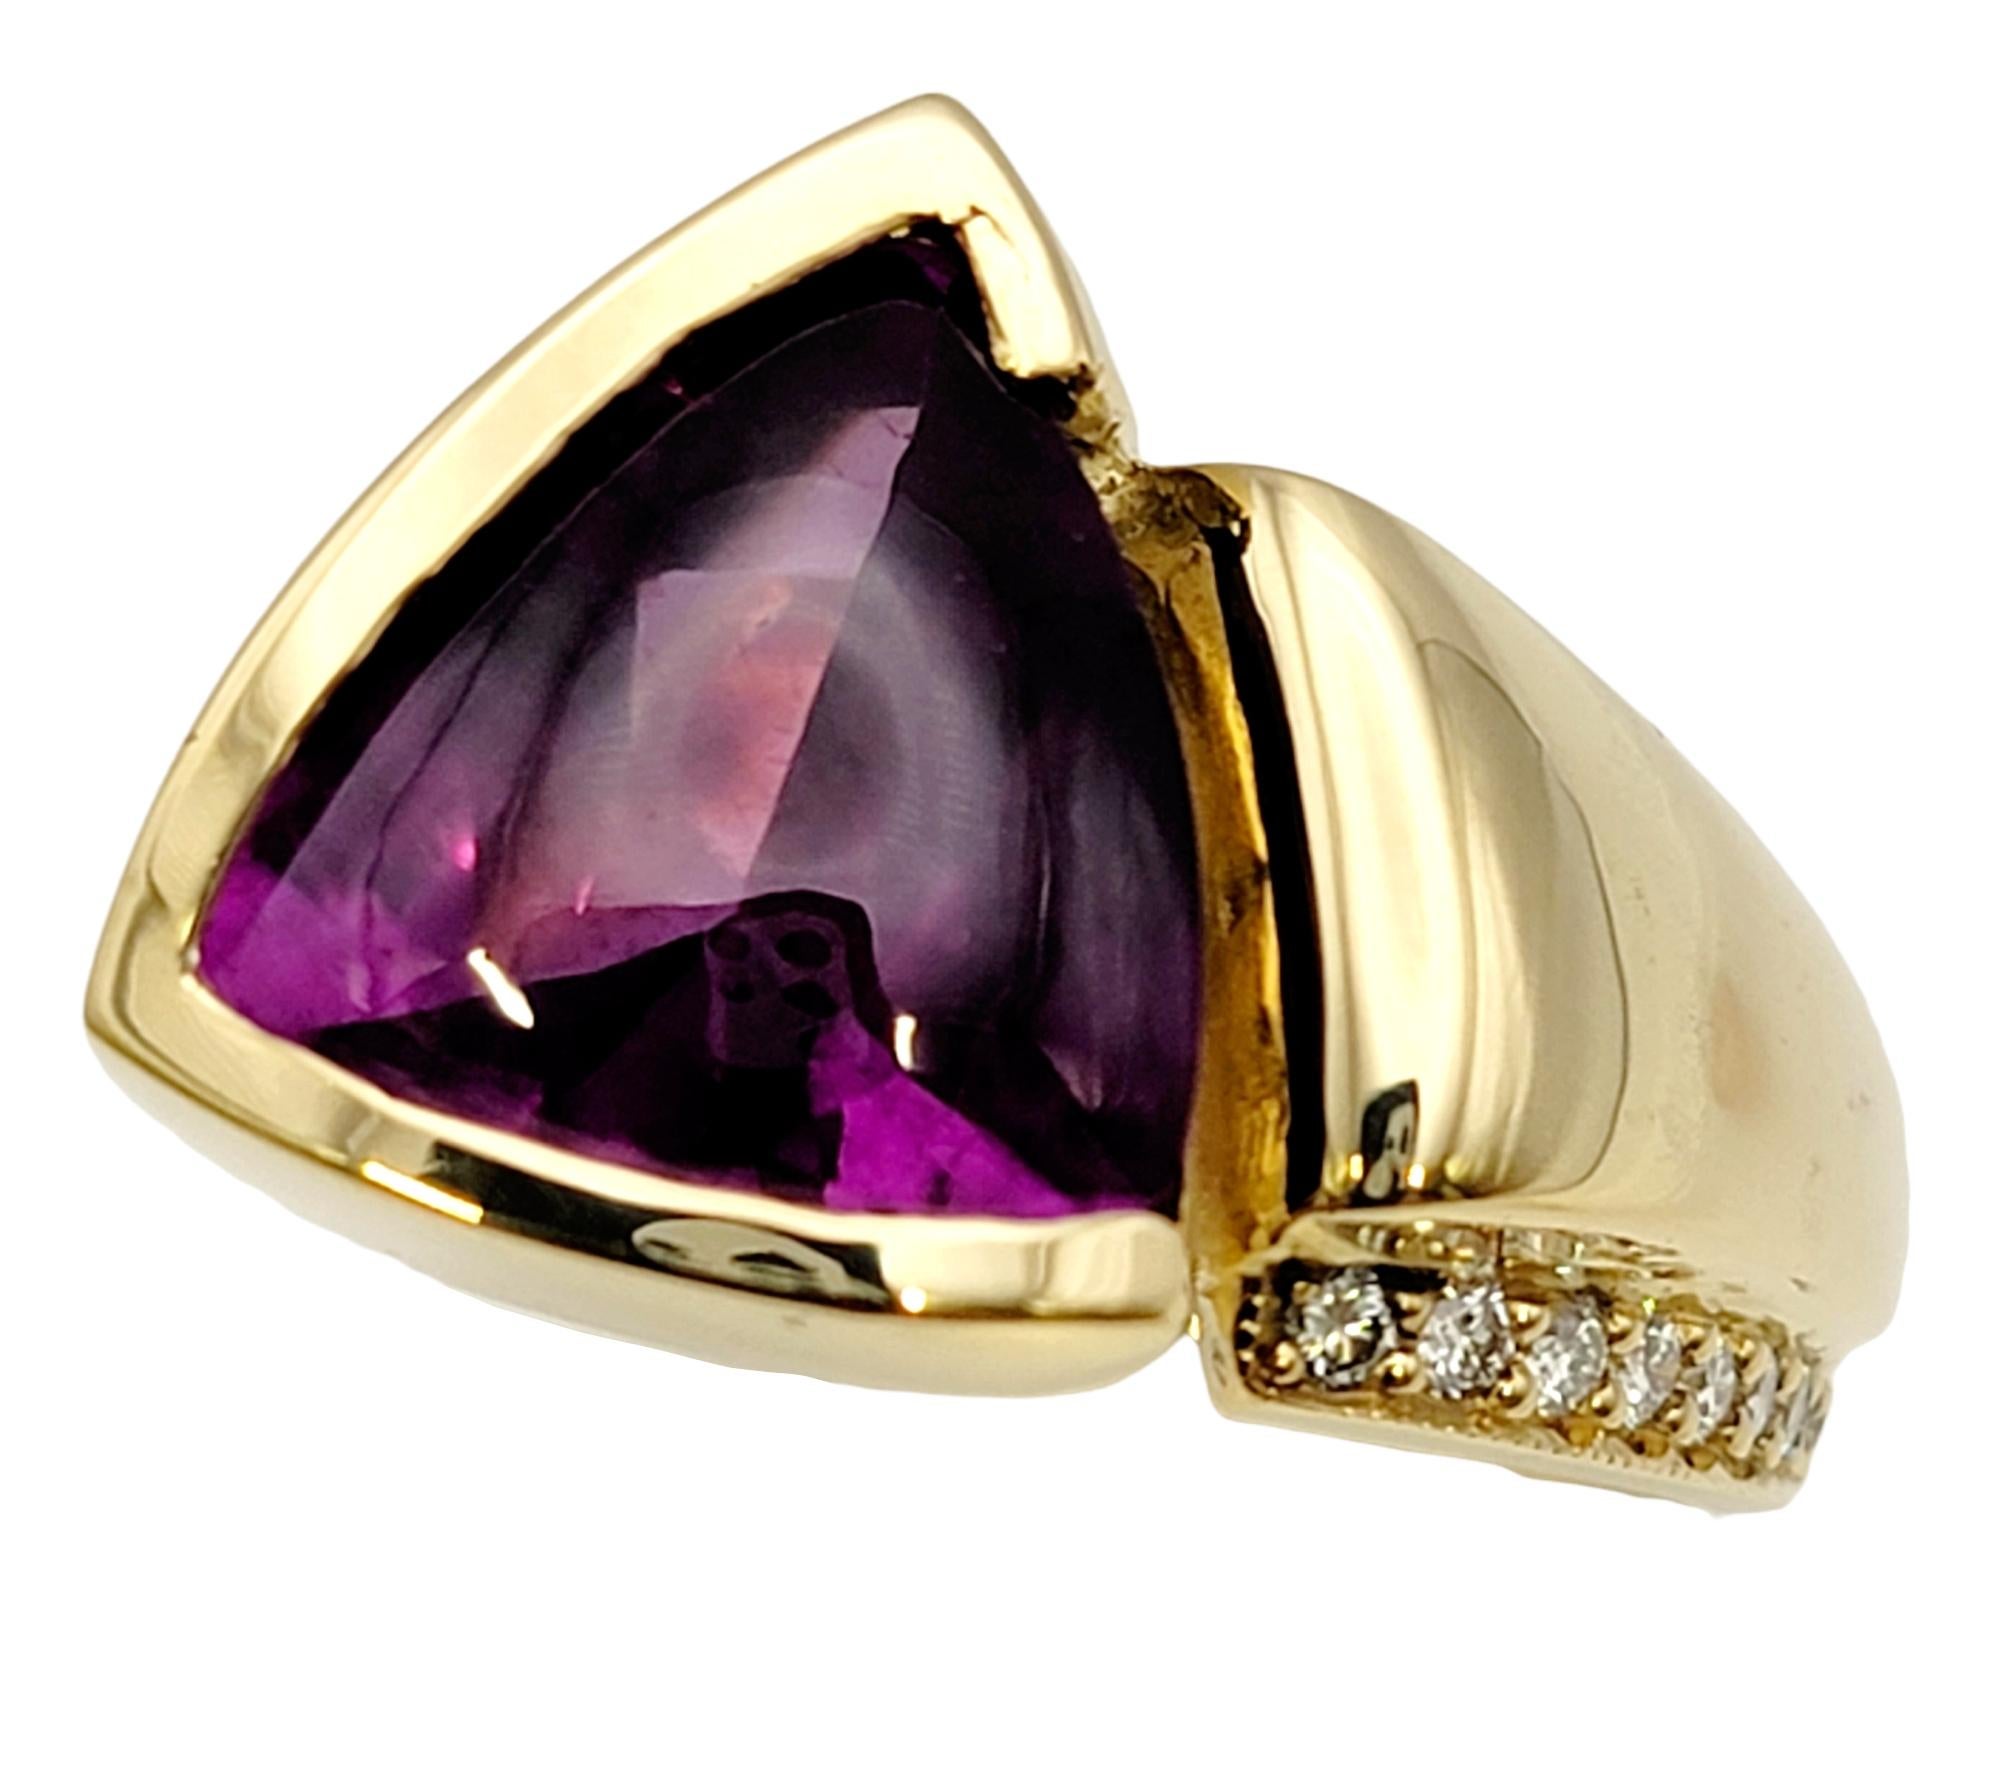 Ring size: 6

Bold and contemporary gemstone ring featuring a large triangular buff top rhodolite garnet and accented with natural white diamonds. This sizeable piece features an asymmetric design in polished 18 karat yellow gold. The bright,